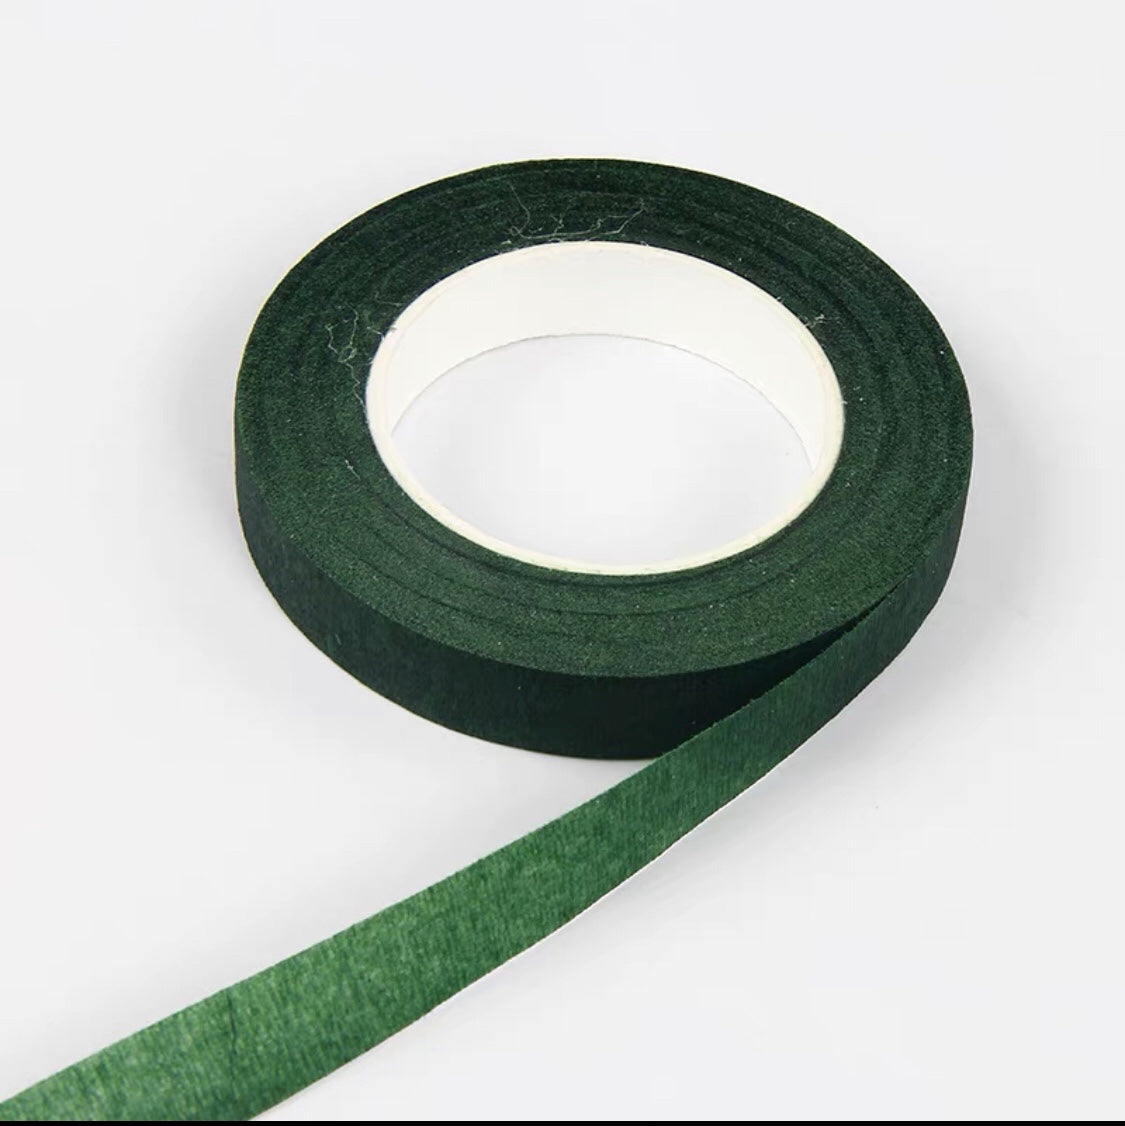 Cake Decor Artificial Flower Floral Tape, Wrapping Florist Tape – Dark Green. - 1 Roll